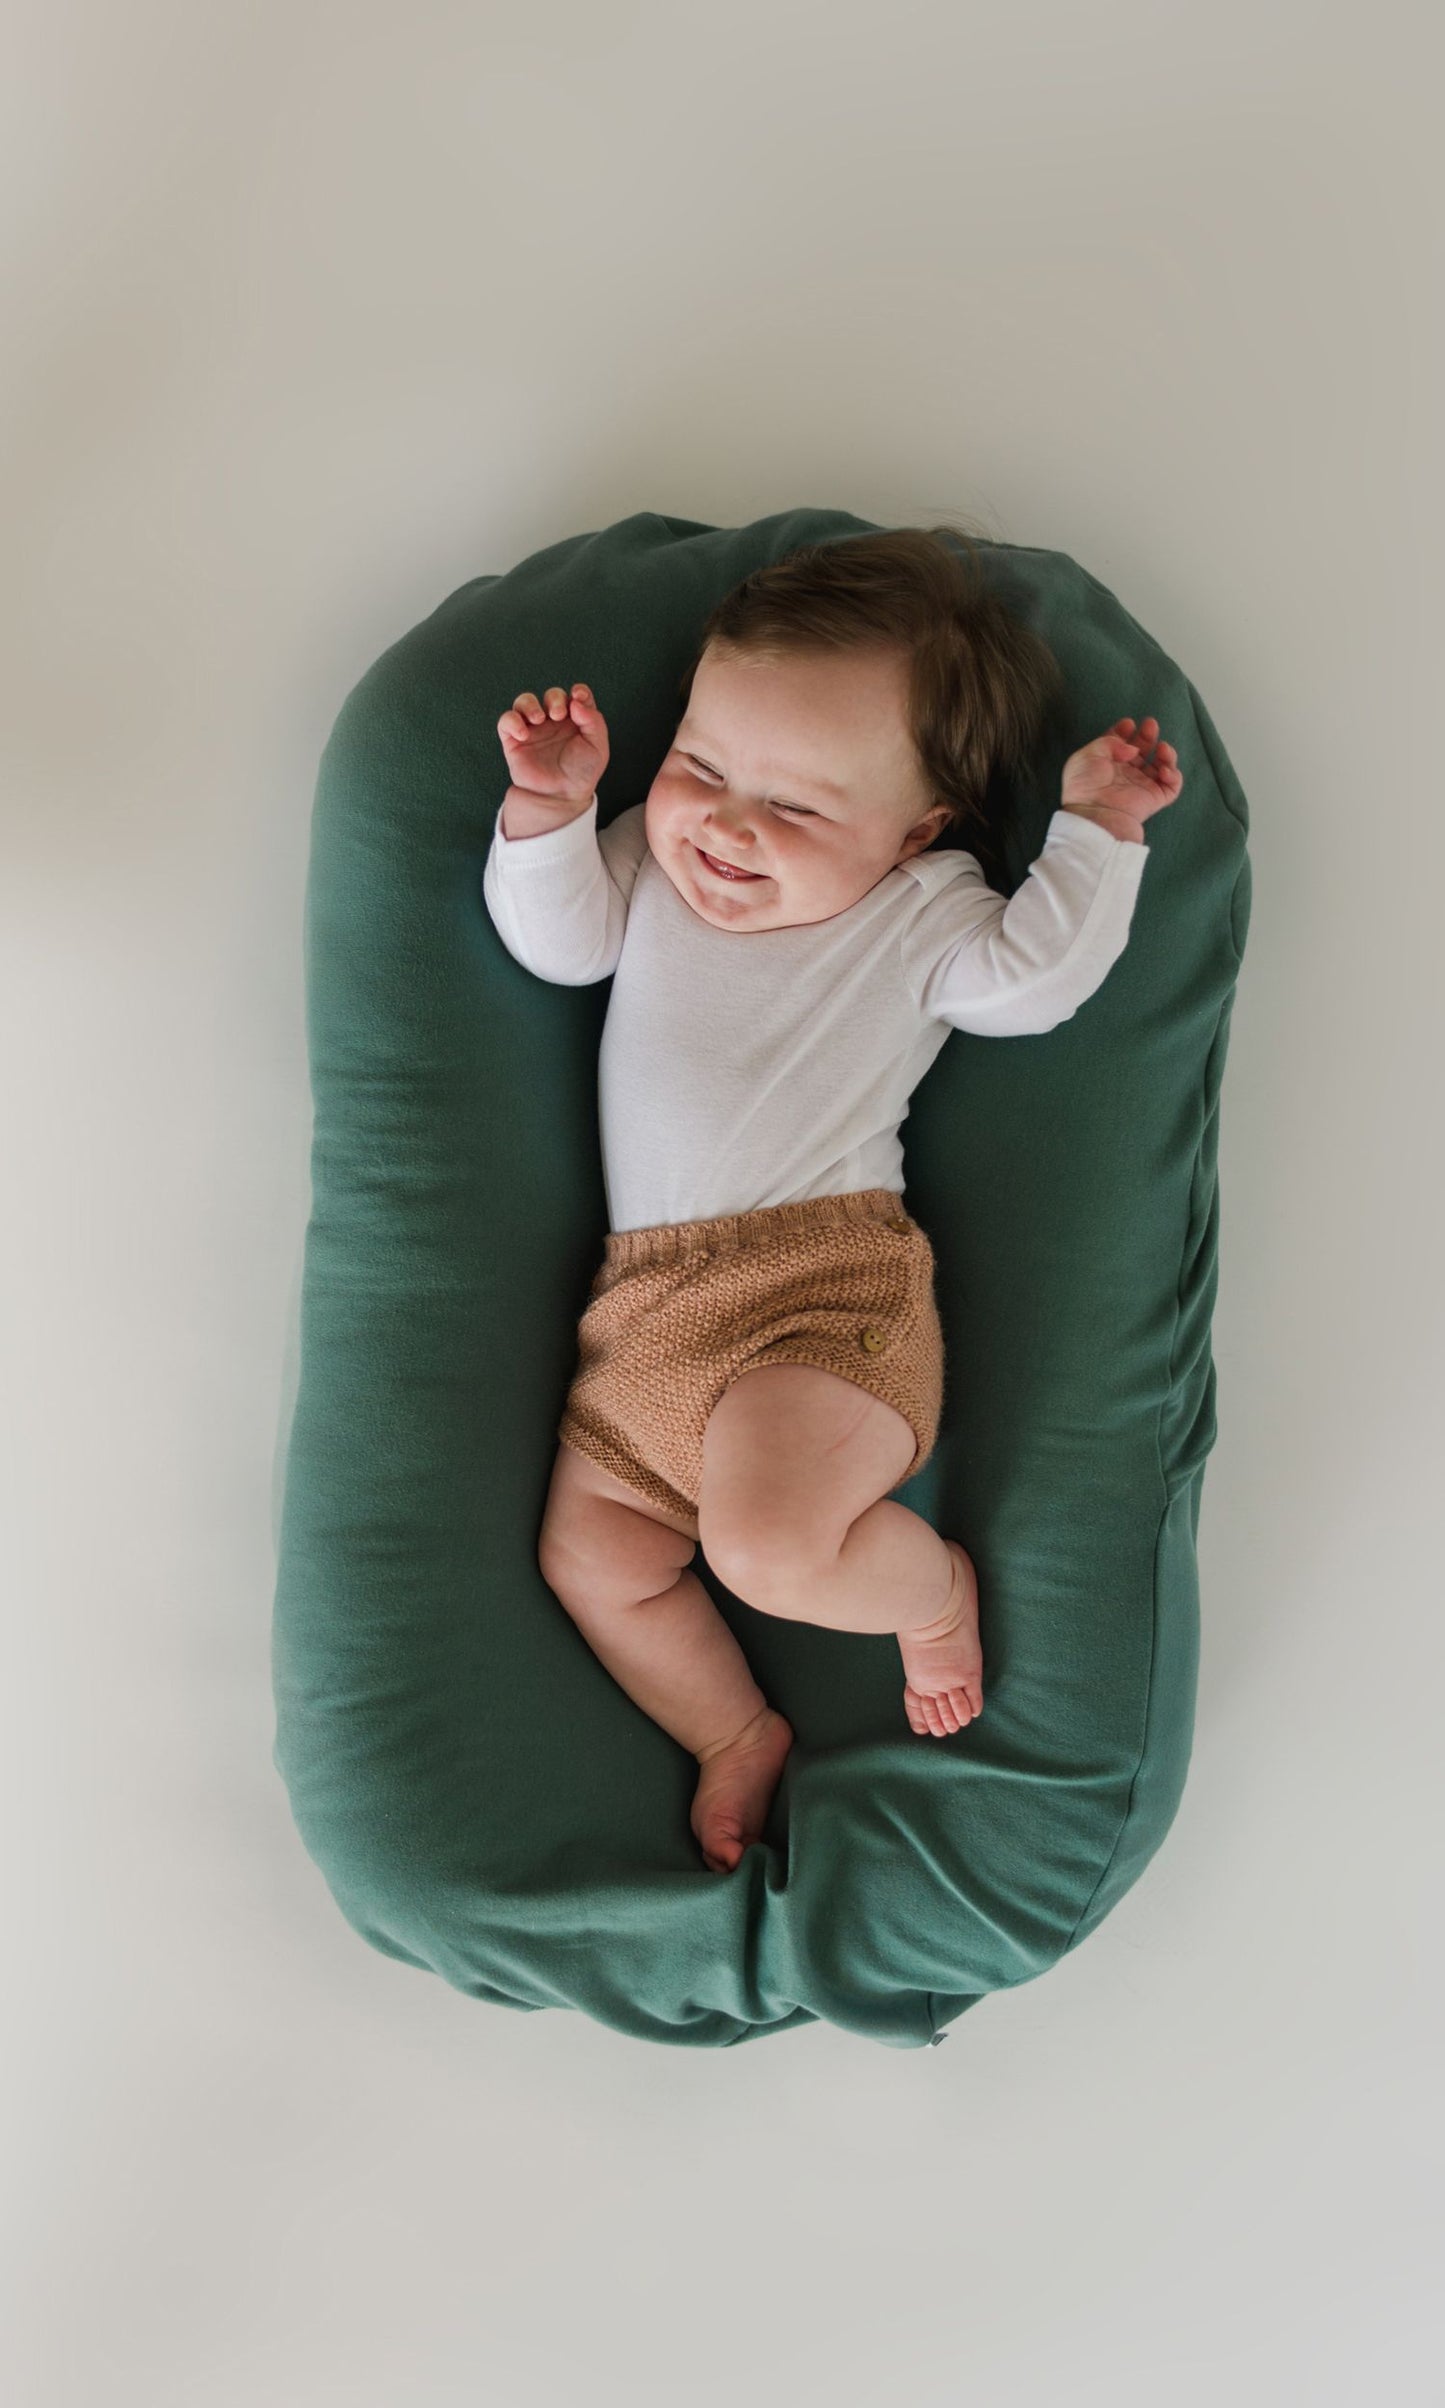 Snuggle Me Organic Infant Lounger Covers